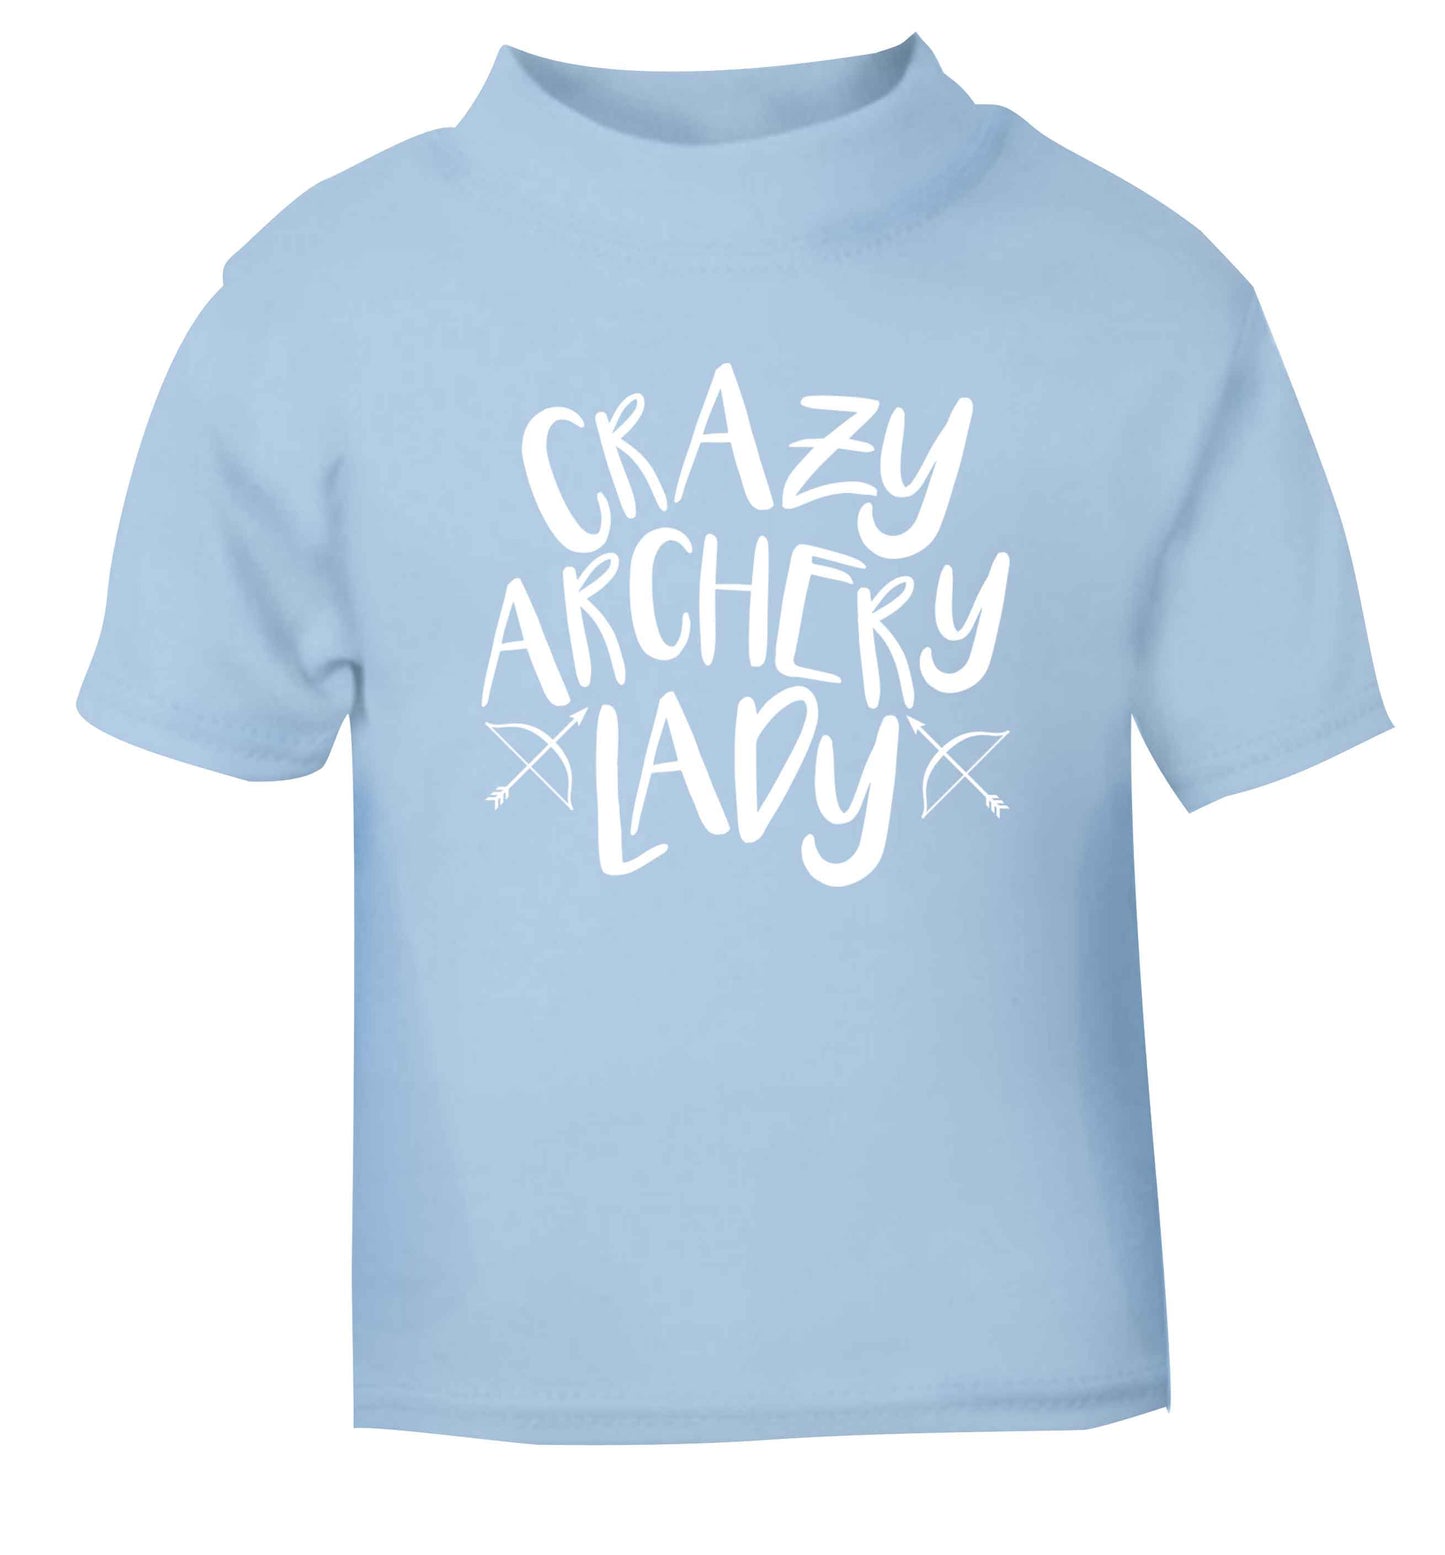 Crazy archery lady light blue Baby Toddler Tshirt 2 Years